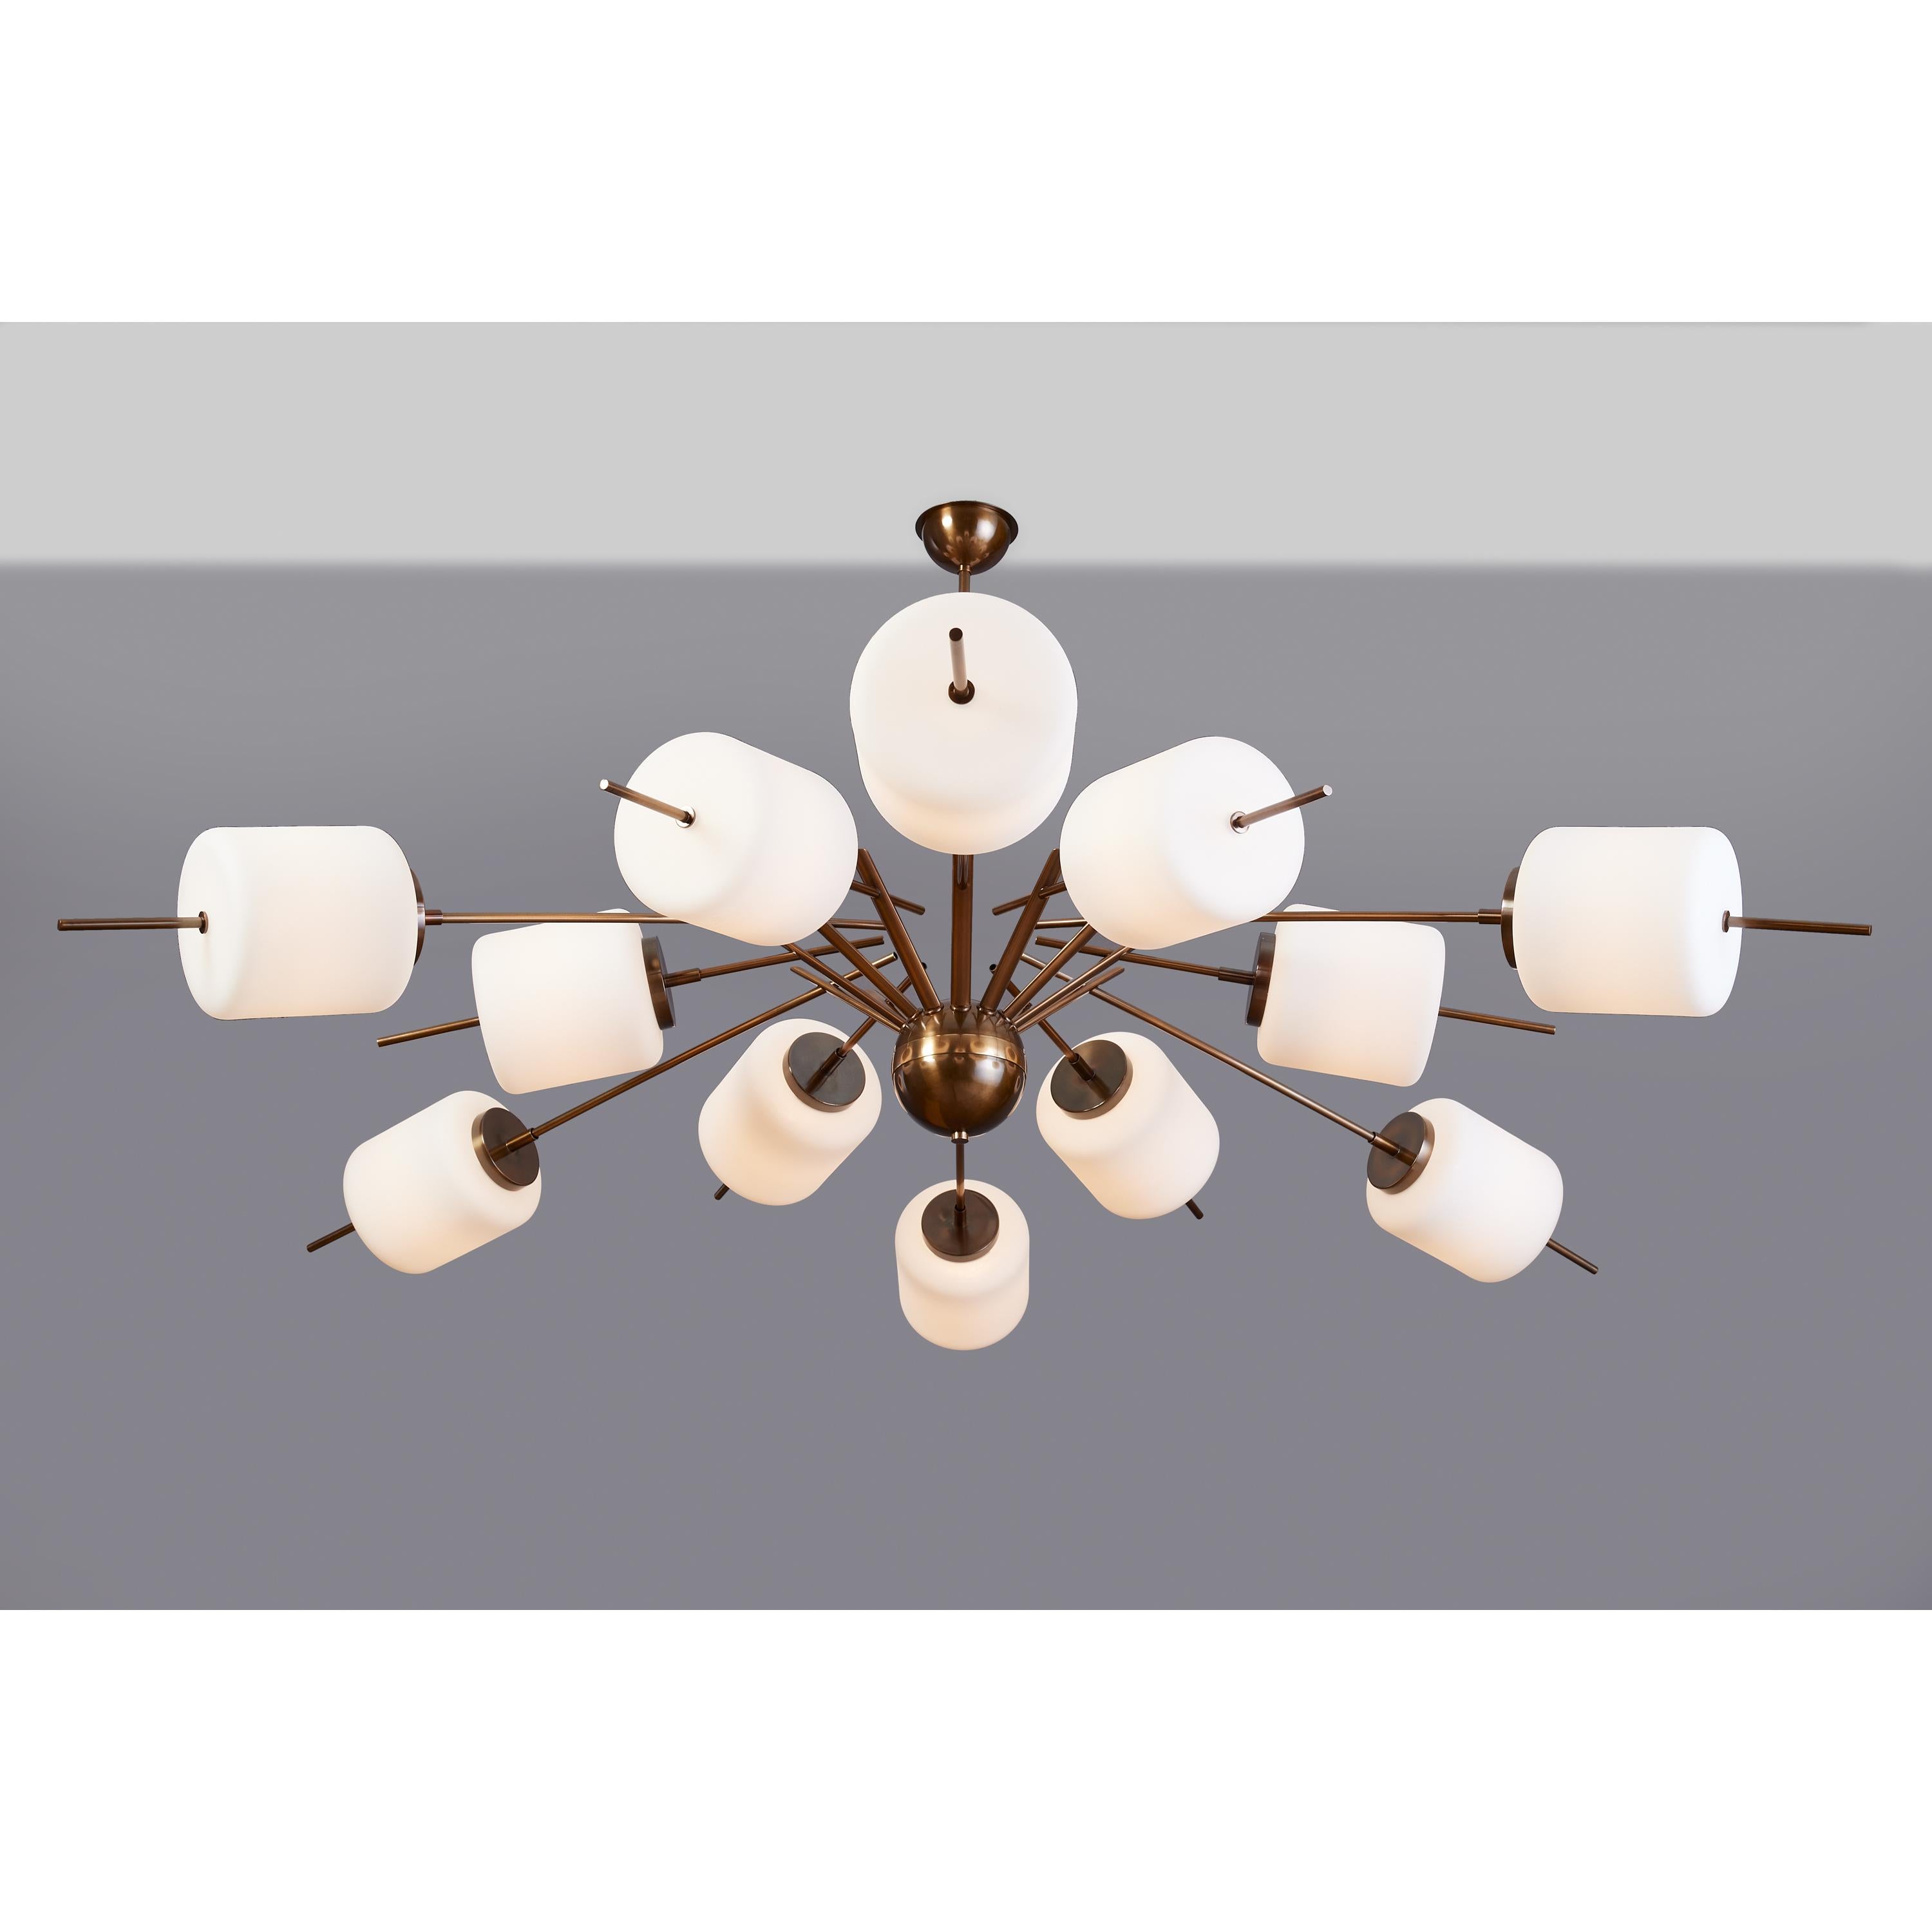 Mid-Century Modern Monumental Chandelier with Twelve Arms and White Glass Shades, Italy 1960s For Sale